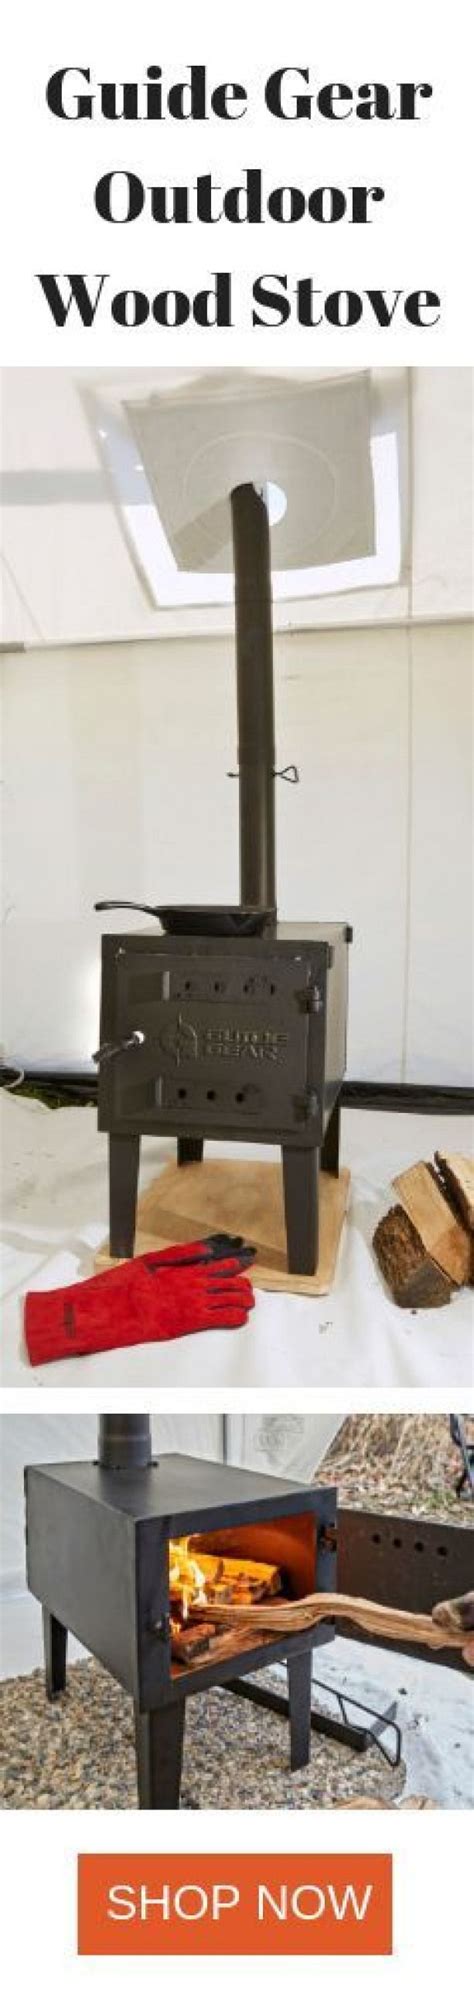 This is what comes in the box. Built to last. With Heating and Cooking capabilities the Guide Gear Outdoor Wood Stove is ...